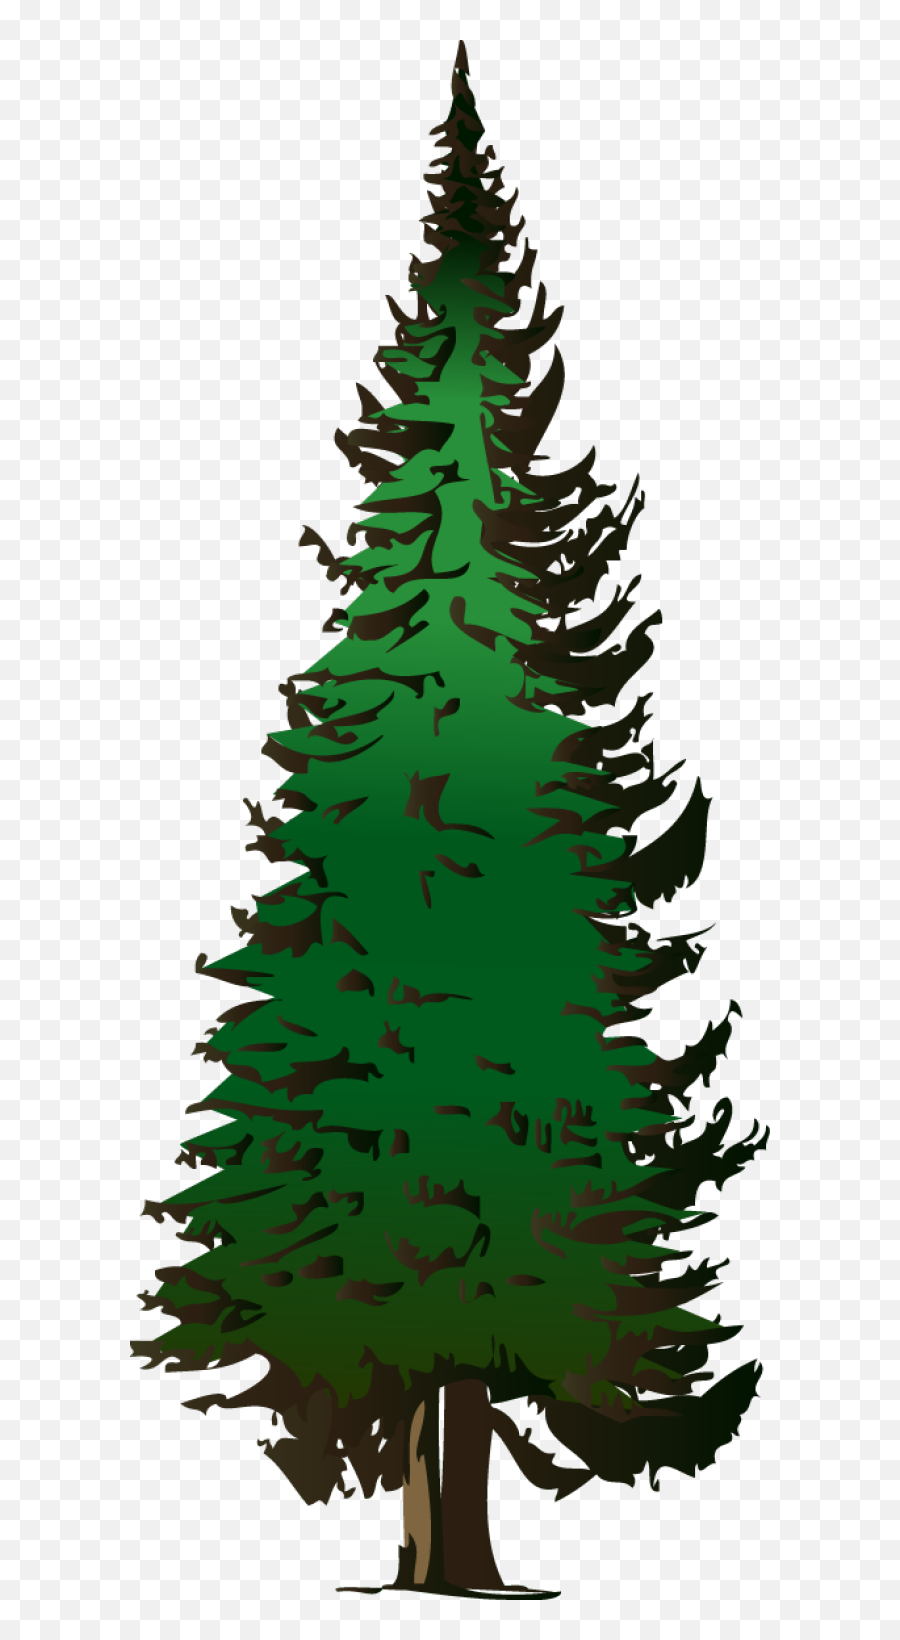 Pine Tree Clipart Free Clipart Images 5 - Clip Art Pine Tree Emoji,Pine Tree Emoji